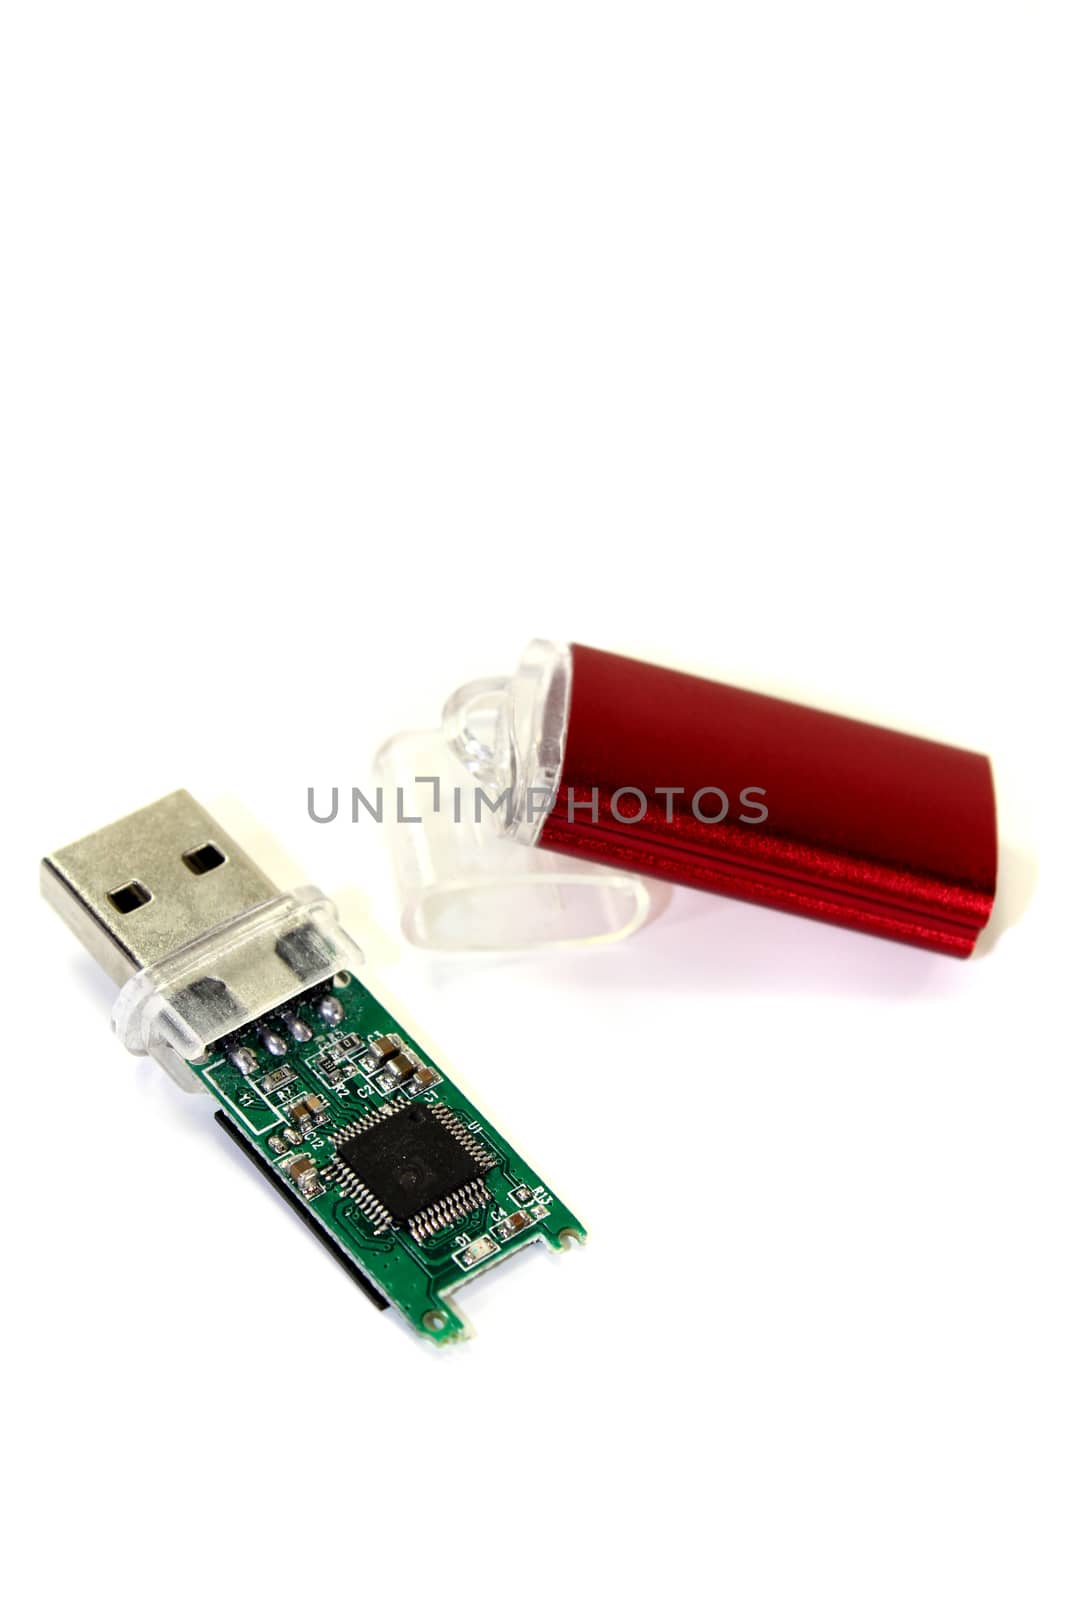 little red USB flash drive by discovery